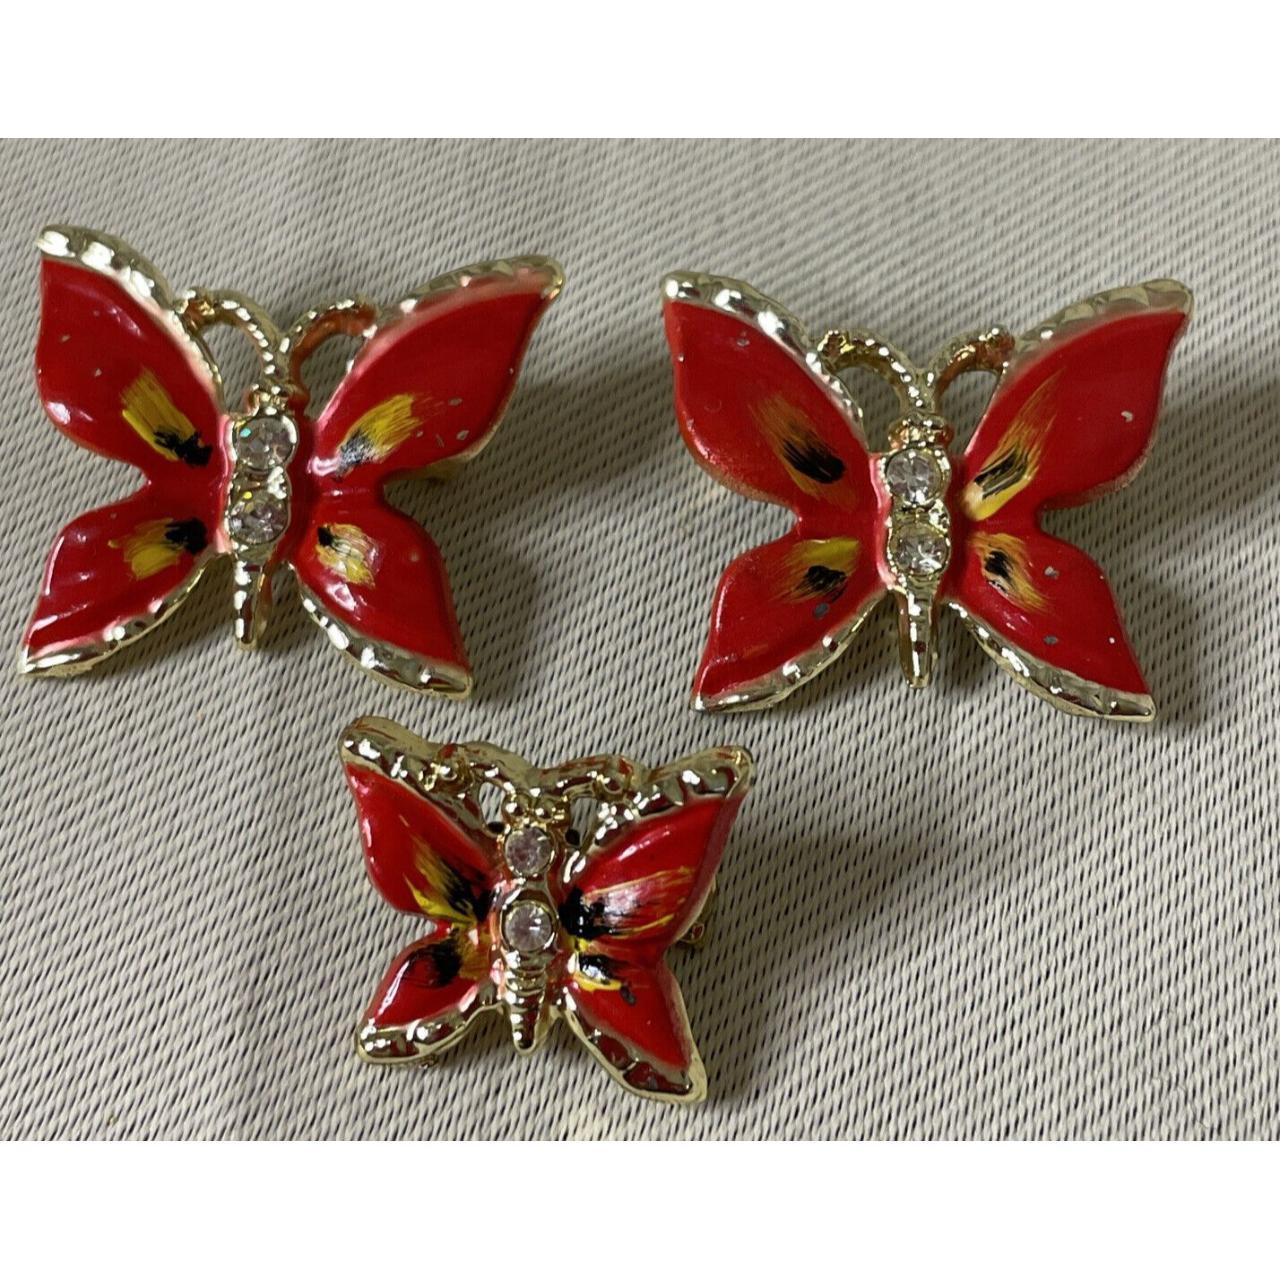 2 Vintage Butterfly Pins with Rhinestones Red - Depop